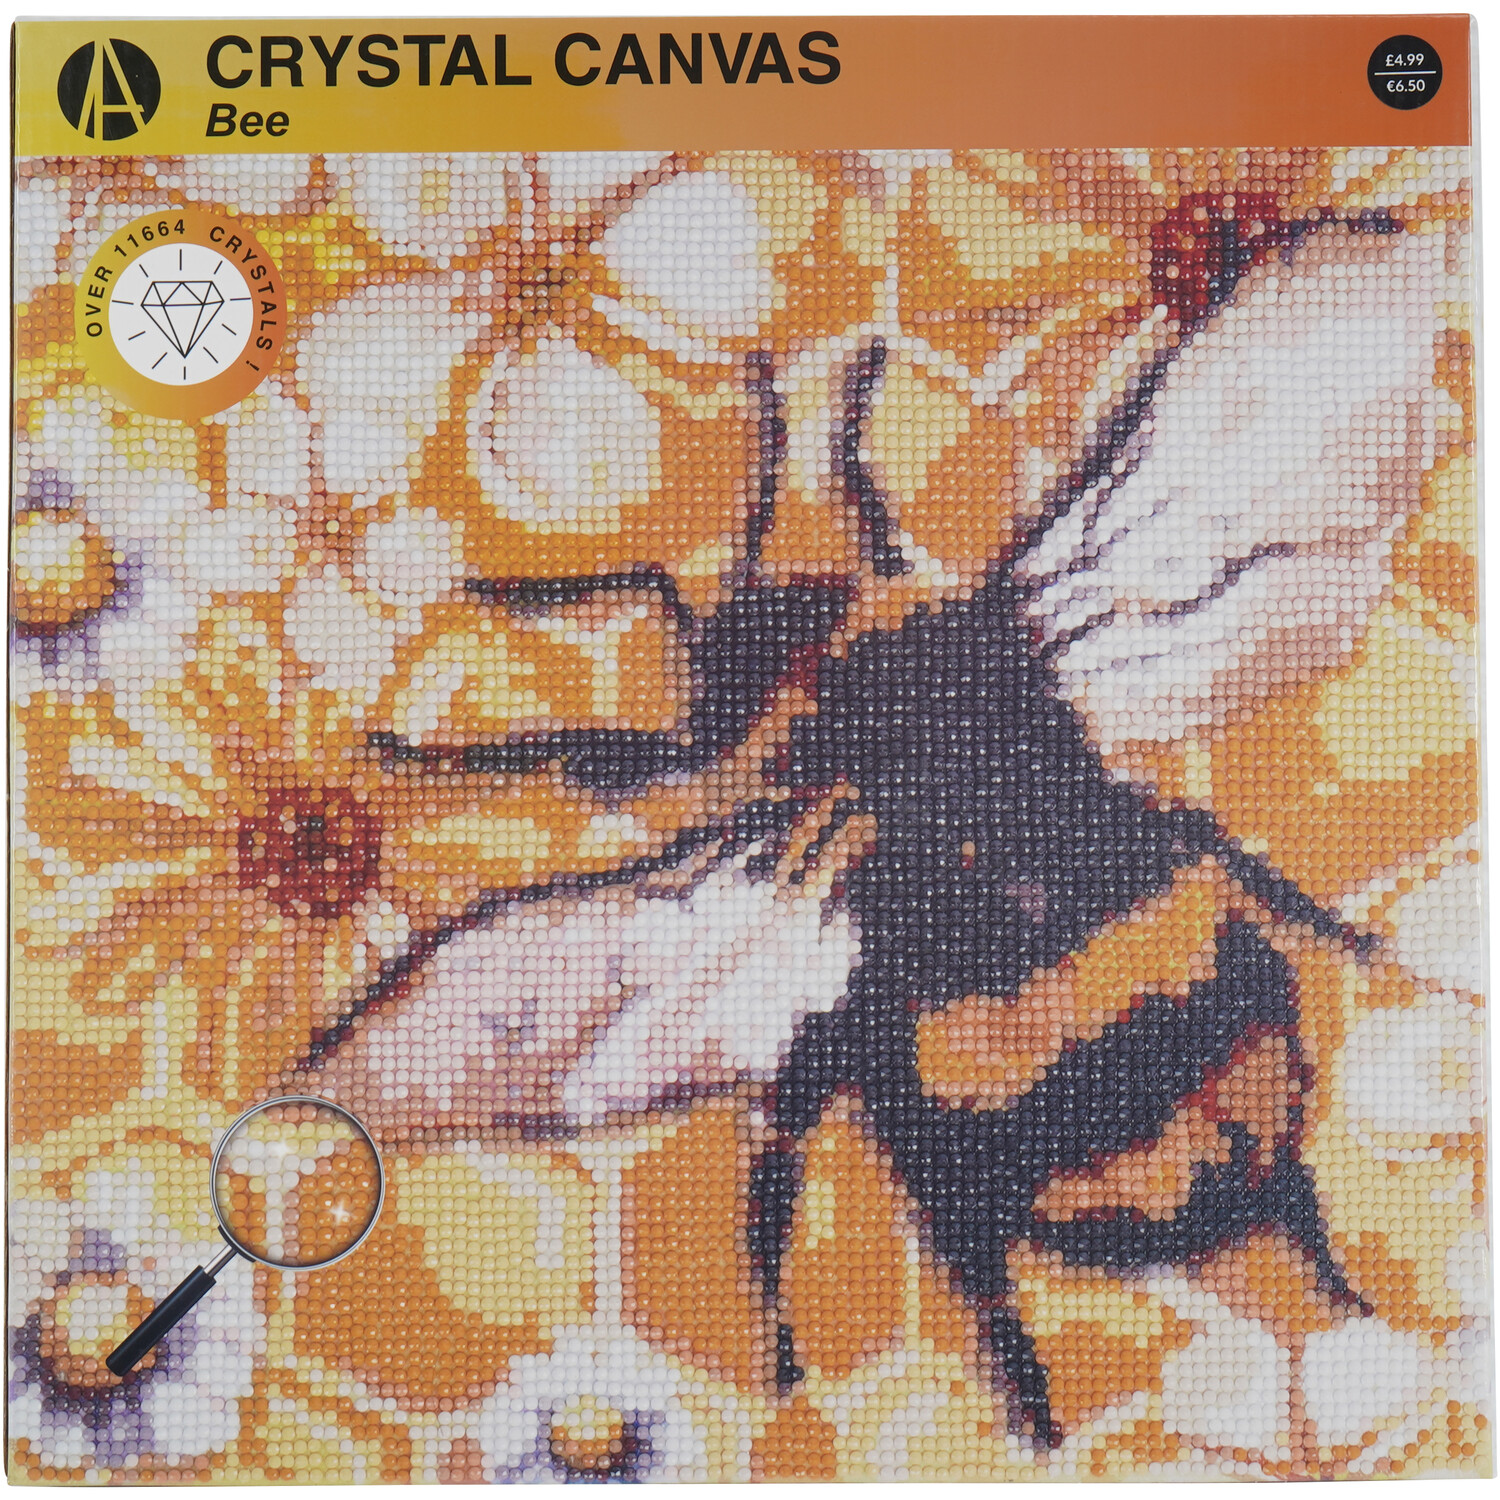 Crystal Canvas Flower or Bee Image 1